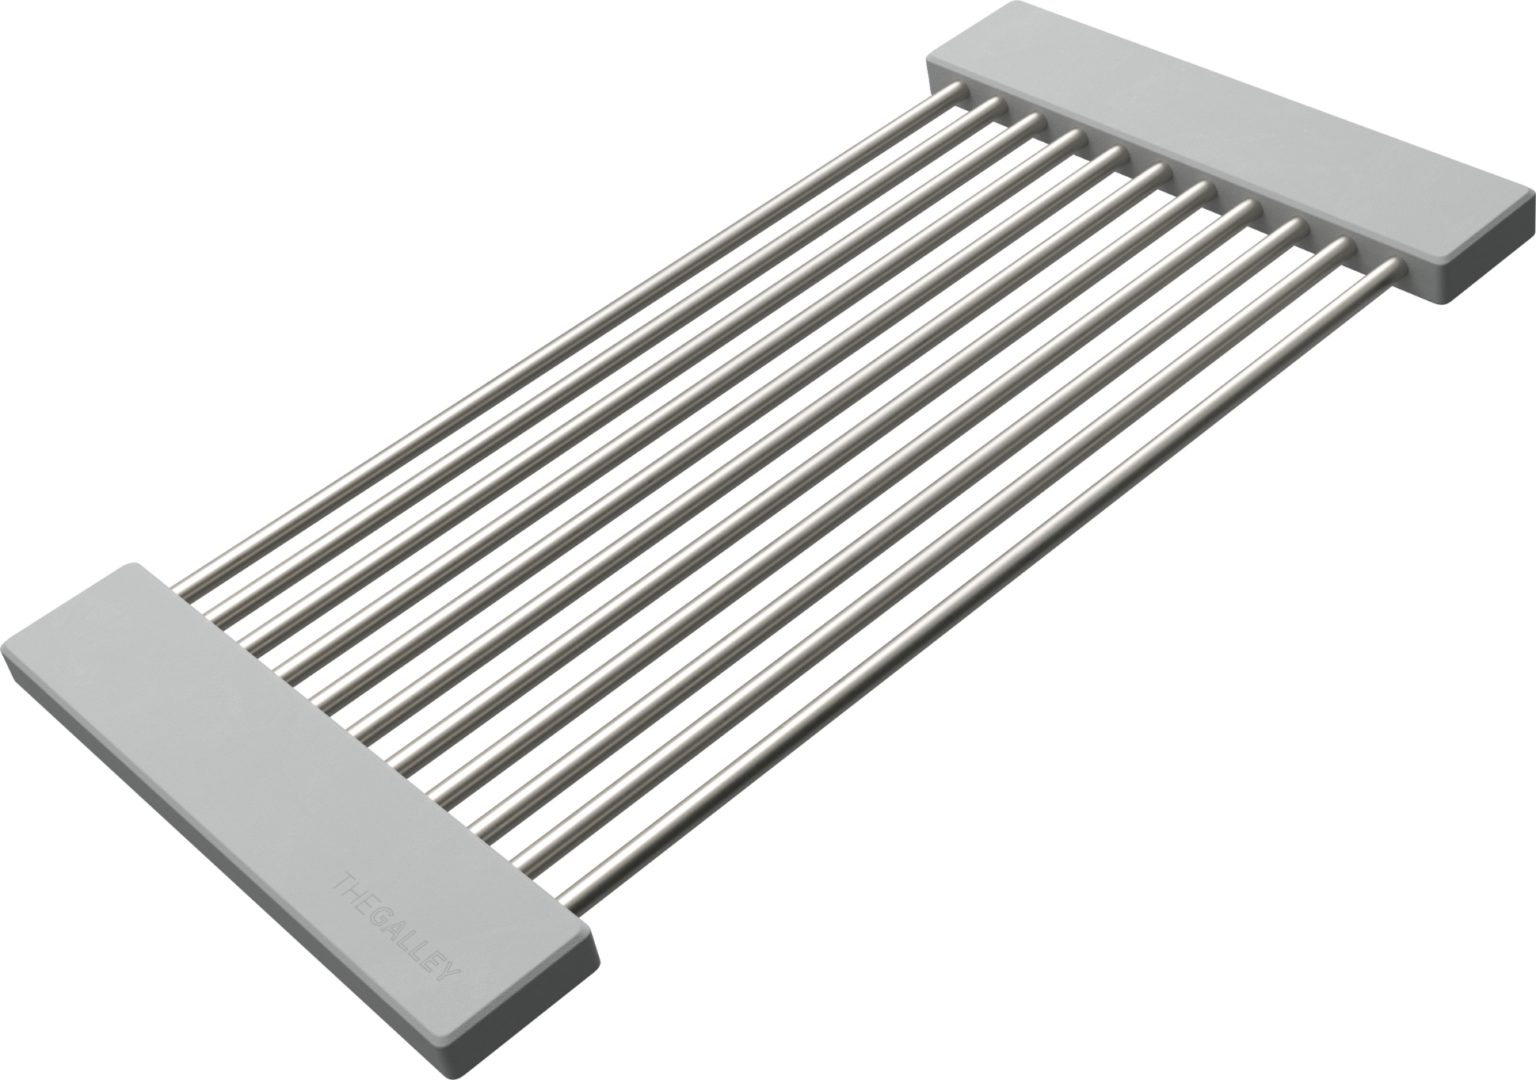 The Galley Upper Tier Drying Rack 9-1/4" x 18"